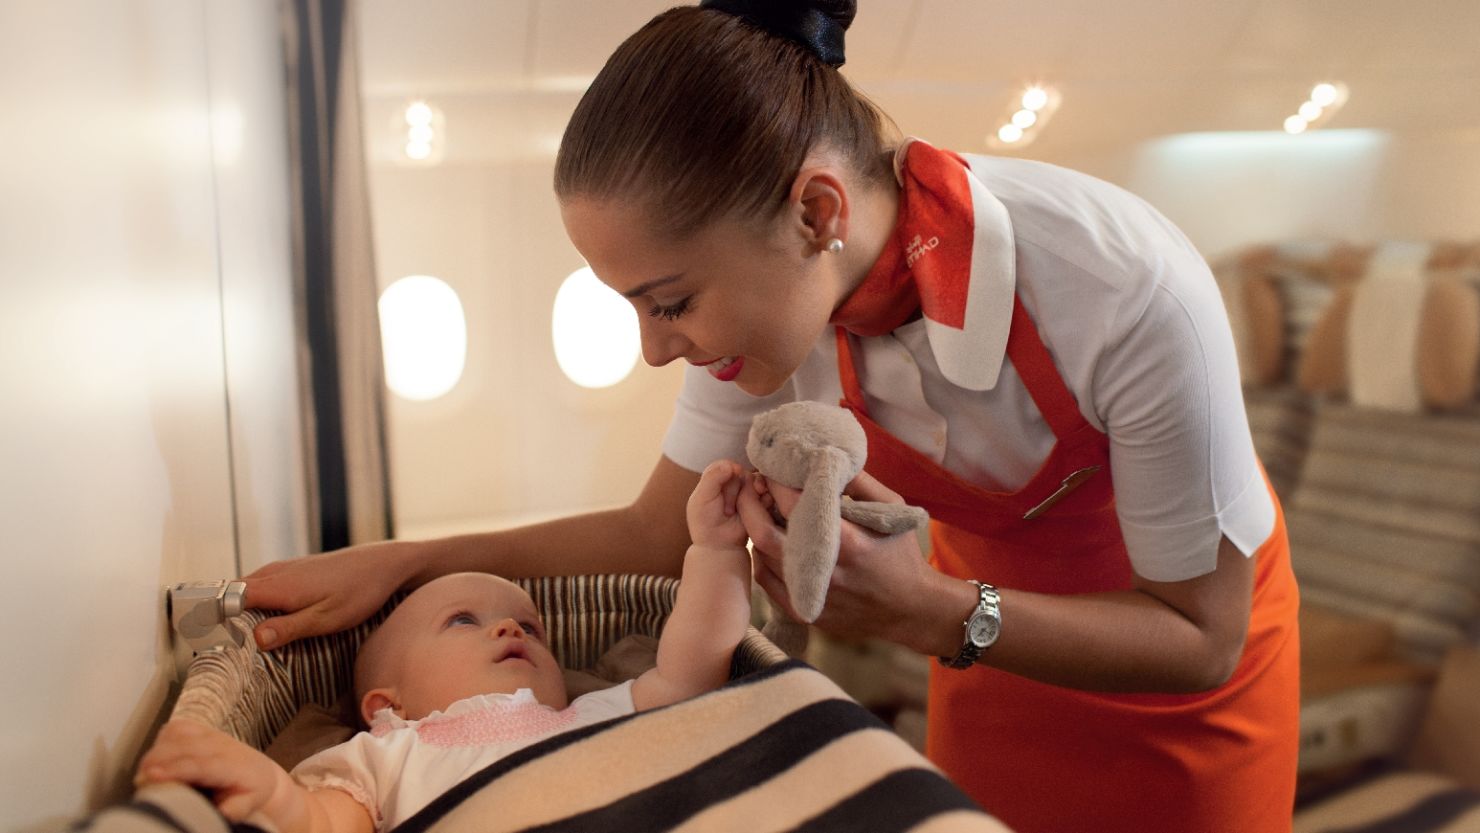 Etihad Airways trained crew members to be in-flight nannies to young passengers.